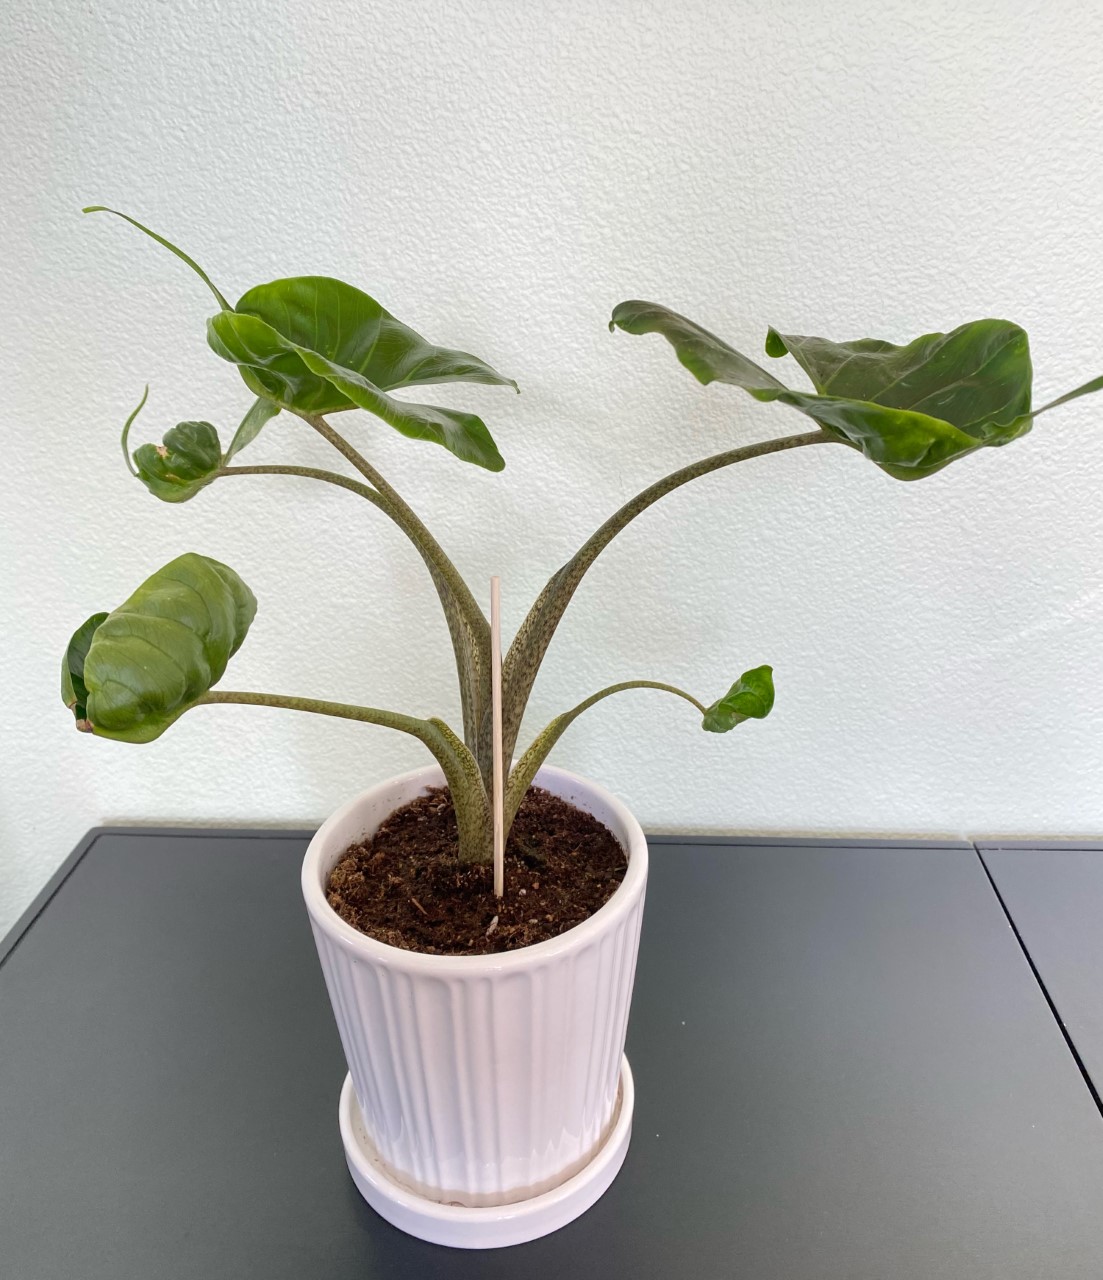 alocasia stingray care, images and videos - chooseyourplant